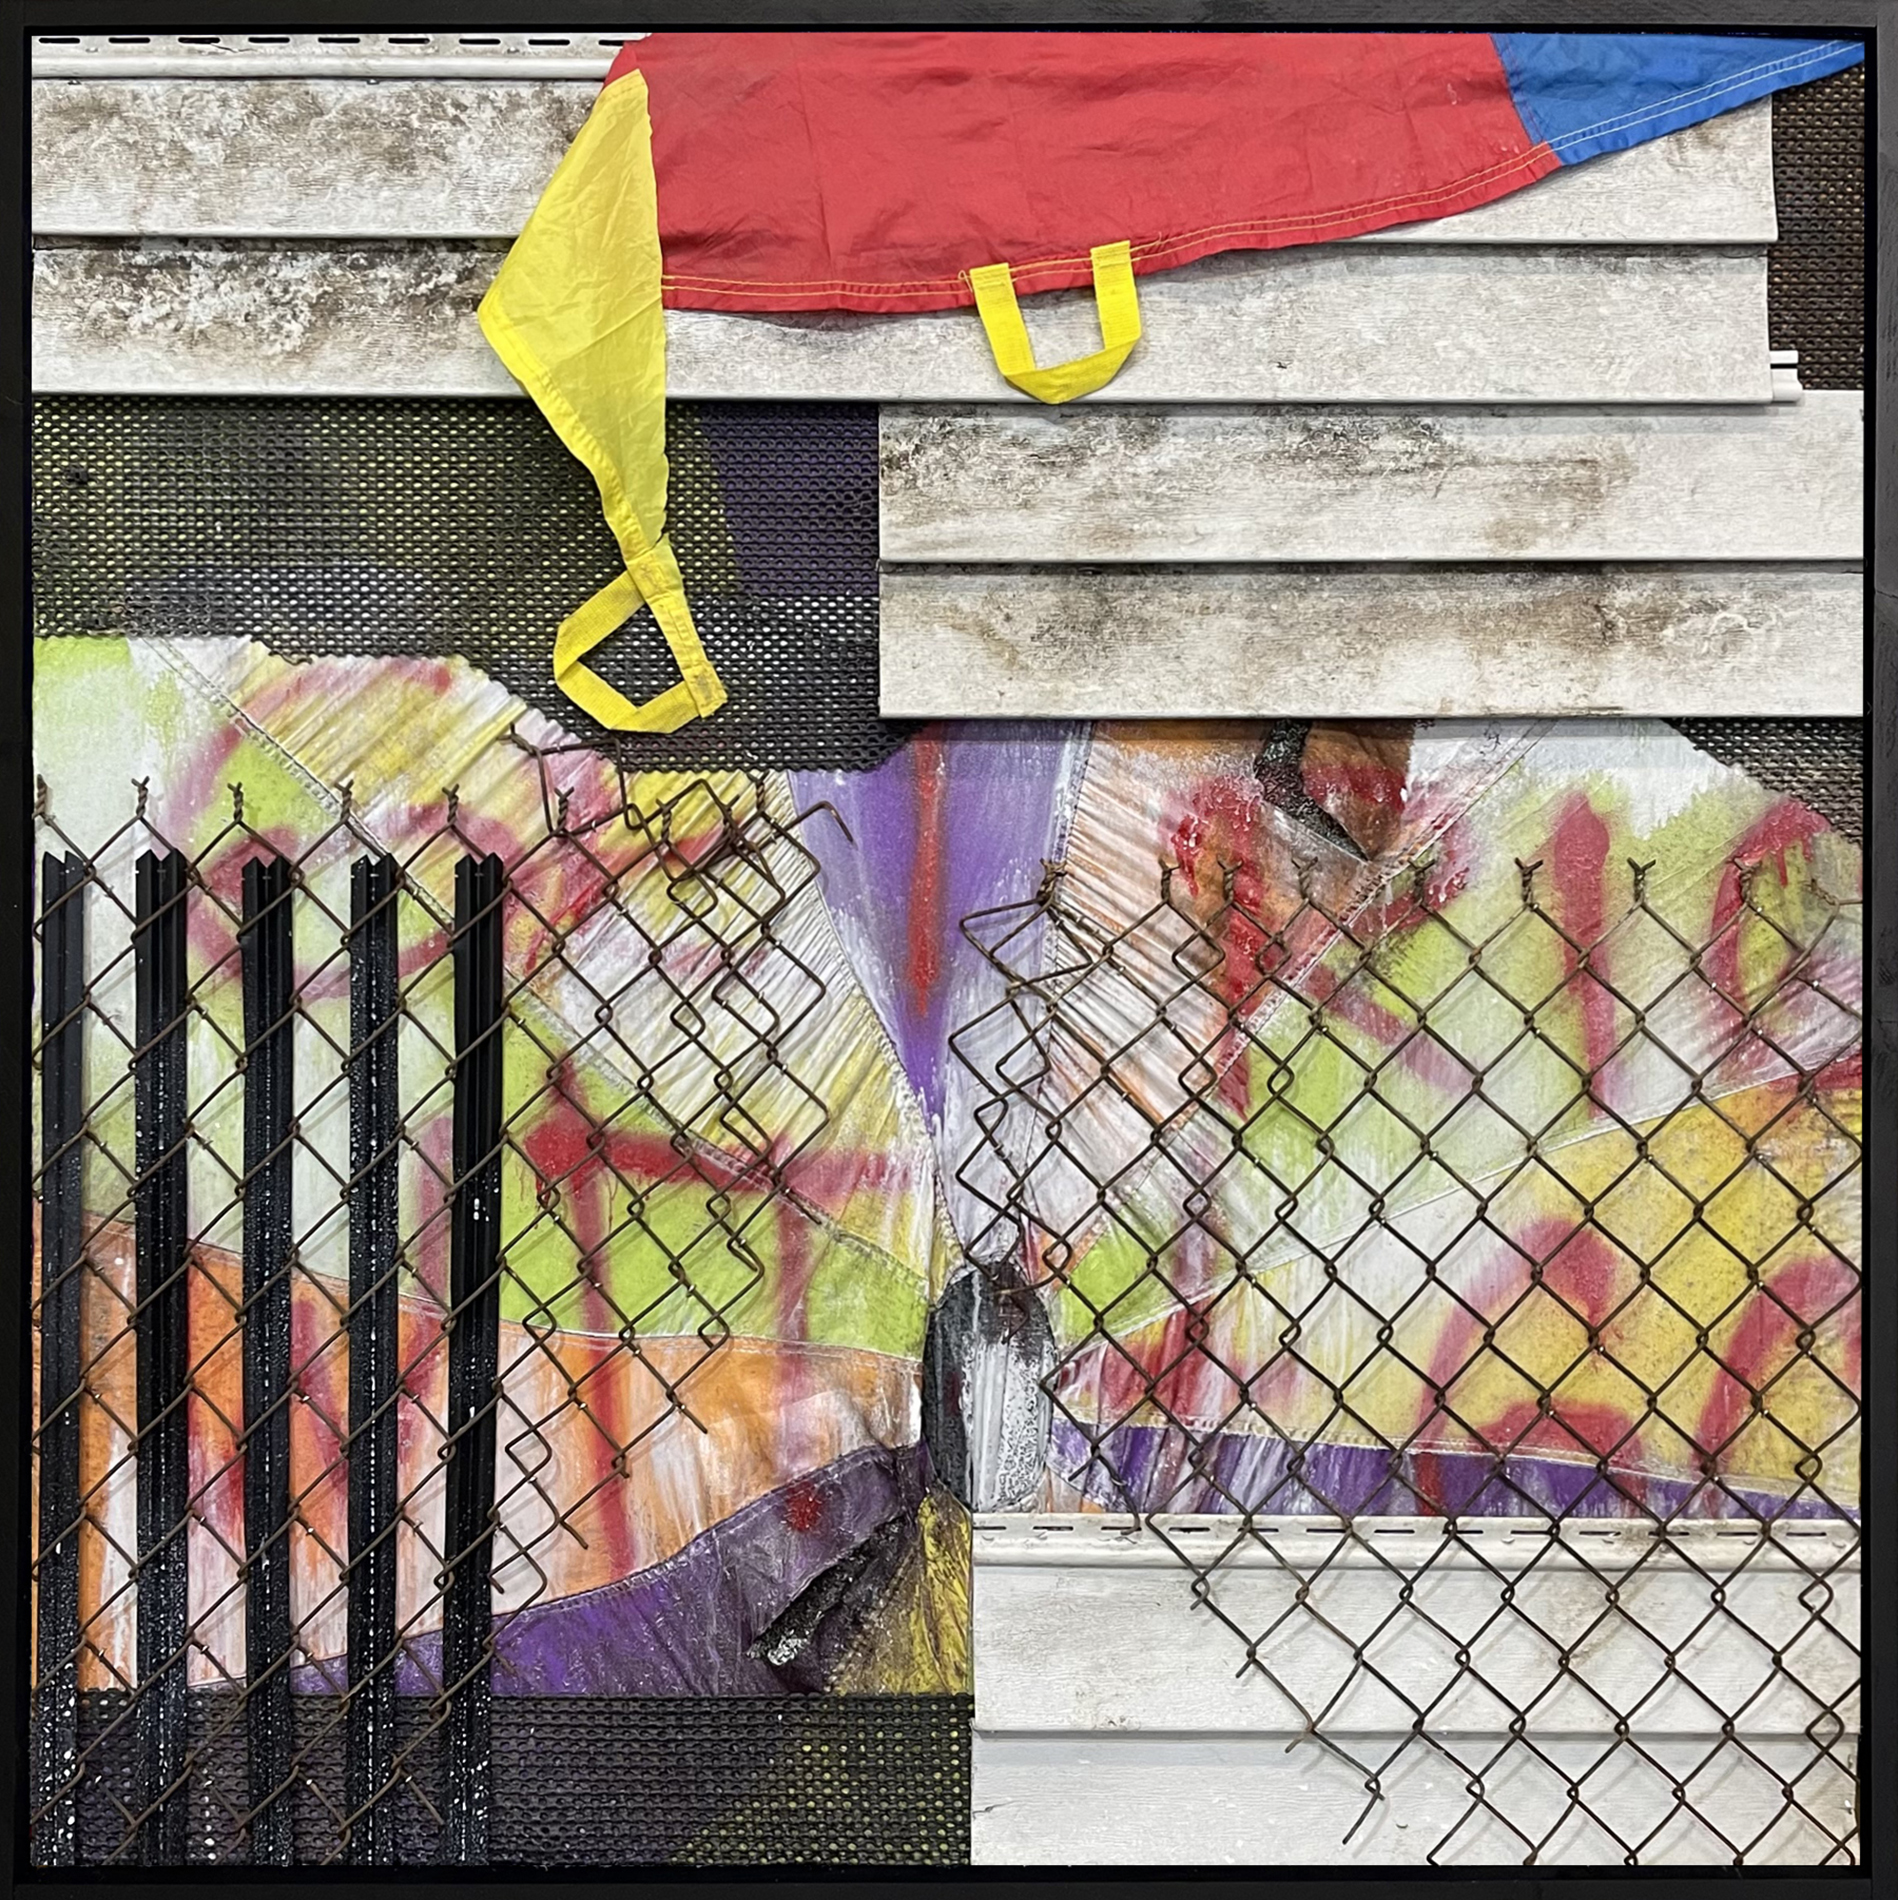 Get Right with God, by Aaron Coleman. A mixed media assemblage made from commercial fencing, salvaged tarps and siding, and gym parachutes.